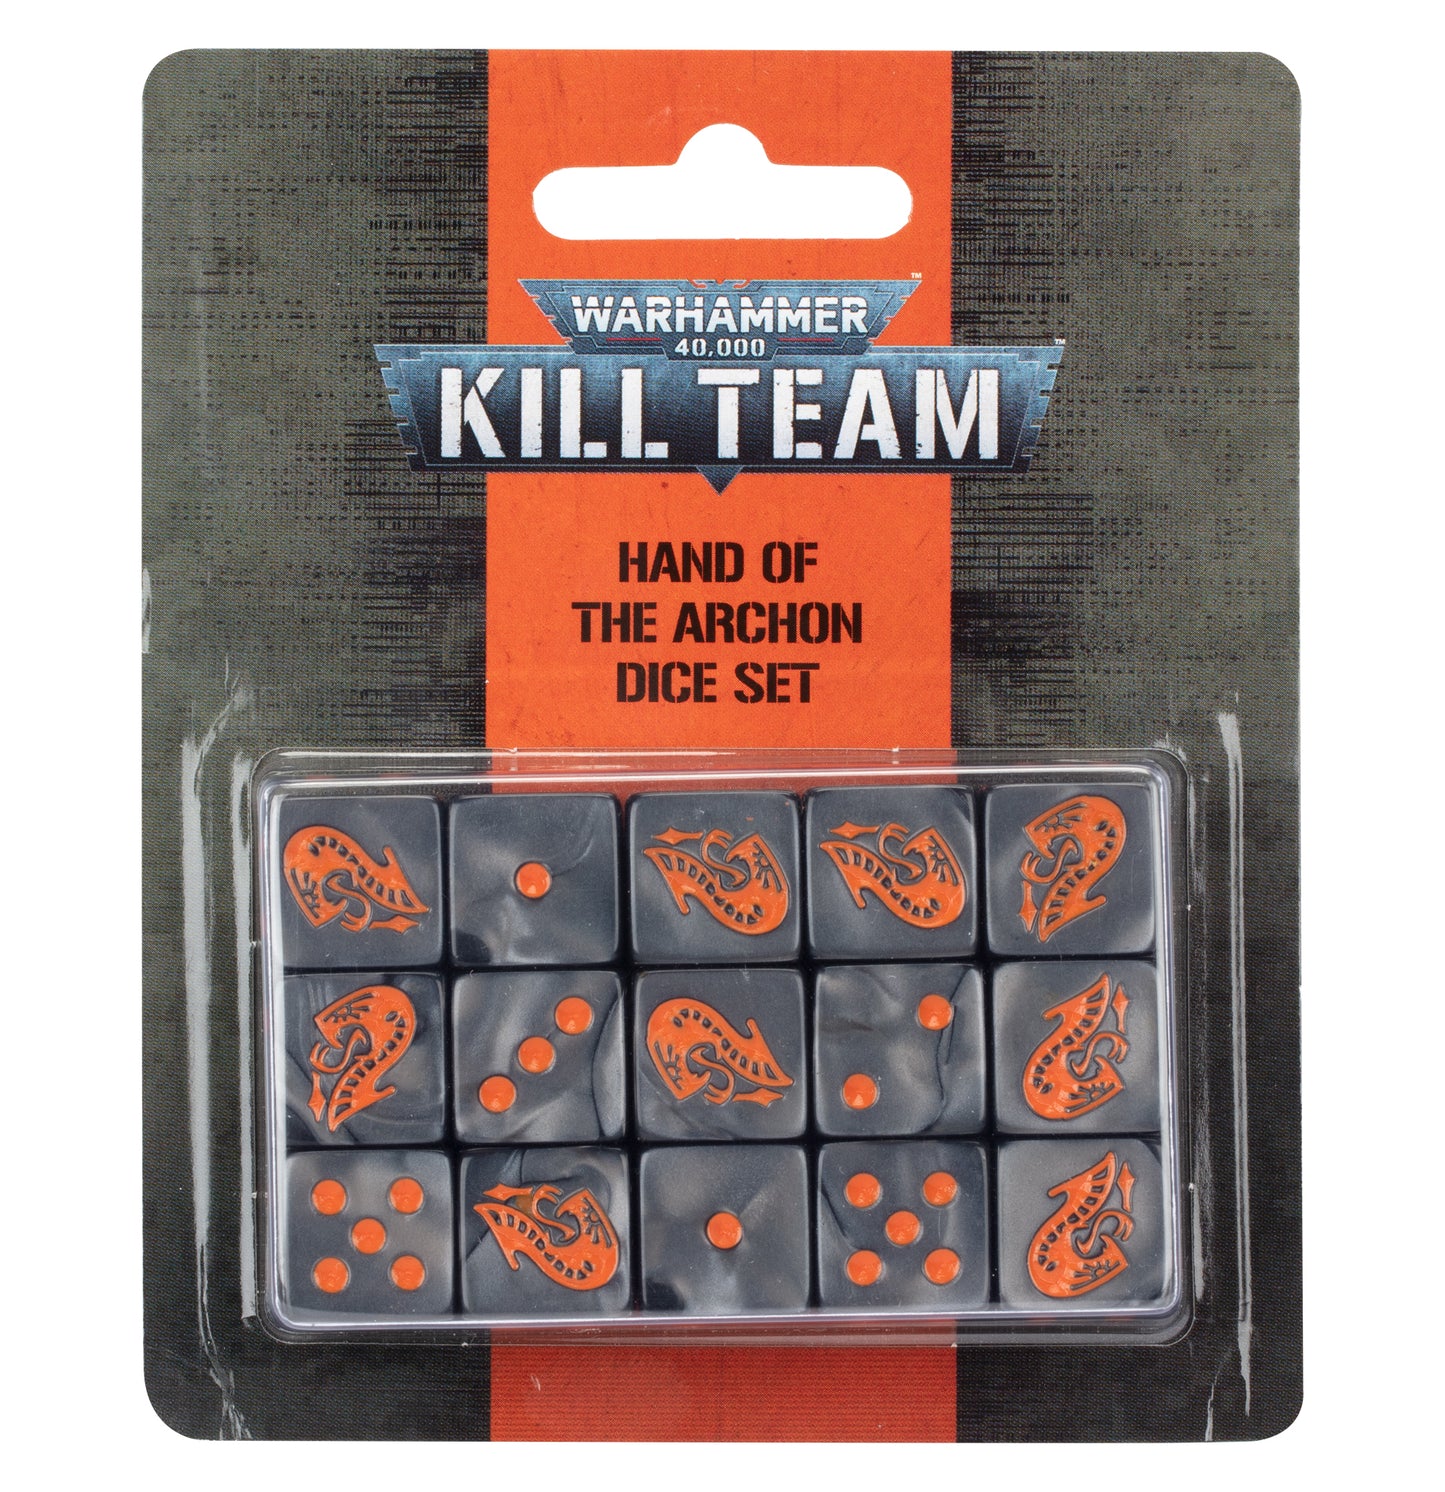 KILL TEAM DICESET: HAND OF THE ARCHON